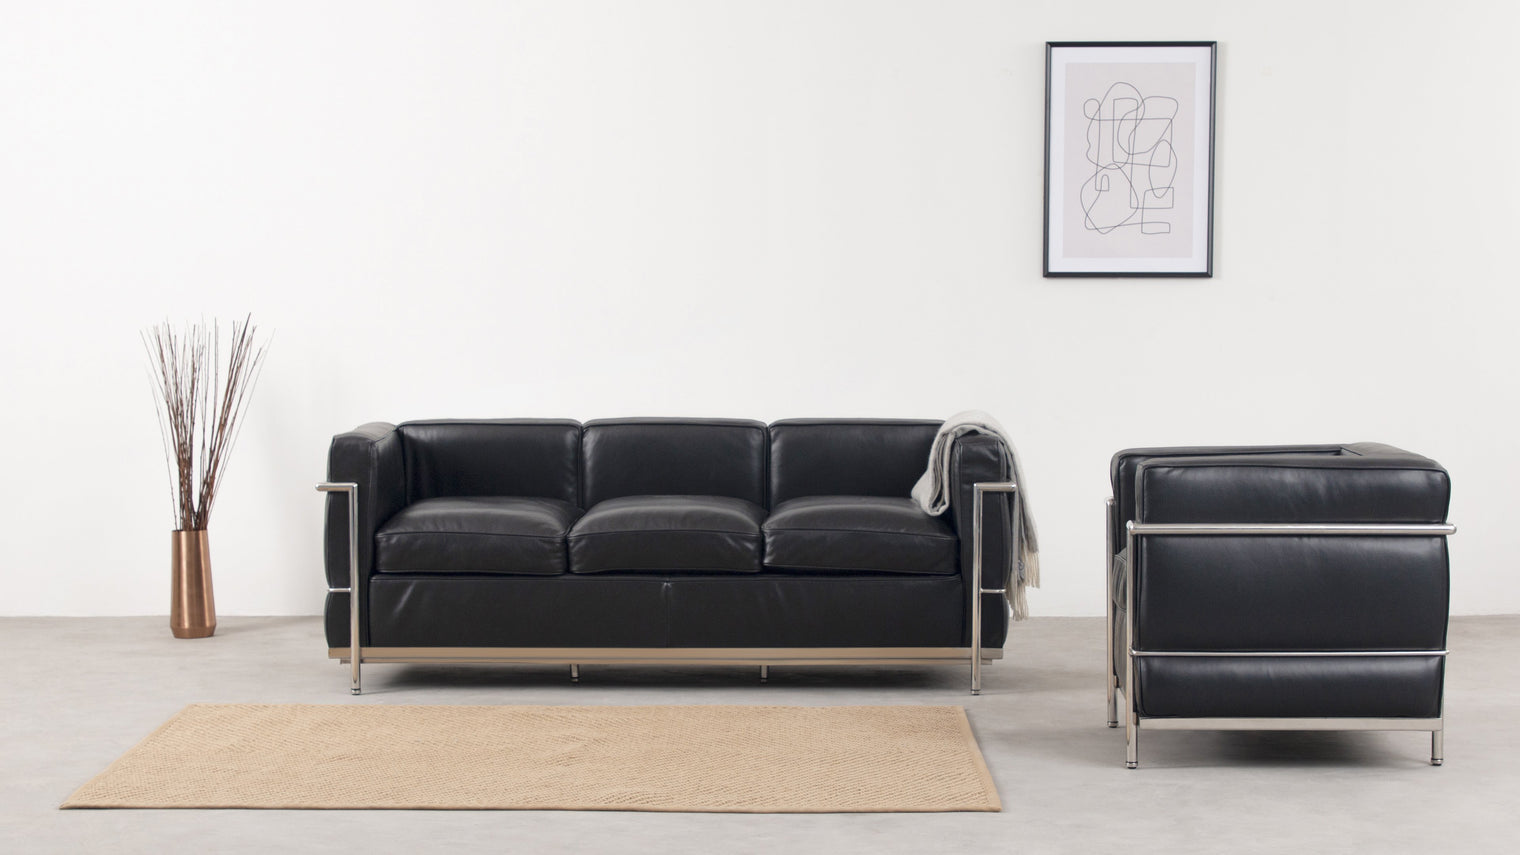 Contemporary elegance|Sleek steel and supple upholstery make this a contemporary seating solution that exudes elegance and grace. Timeless in its aesthetic, we recommend pairing this three-seater sofa with the compact two-seater version to maximize your home or business space.
